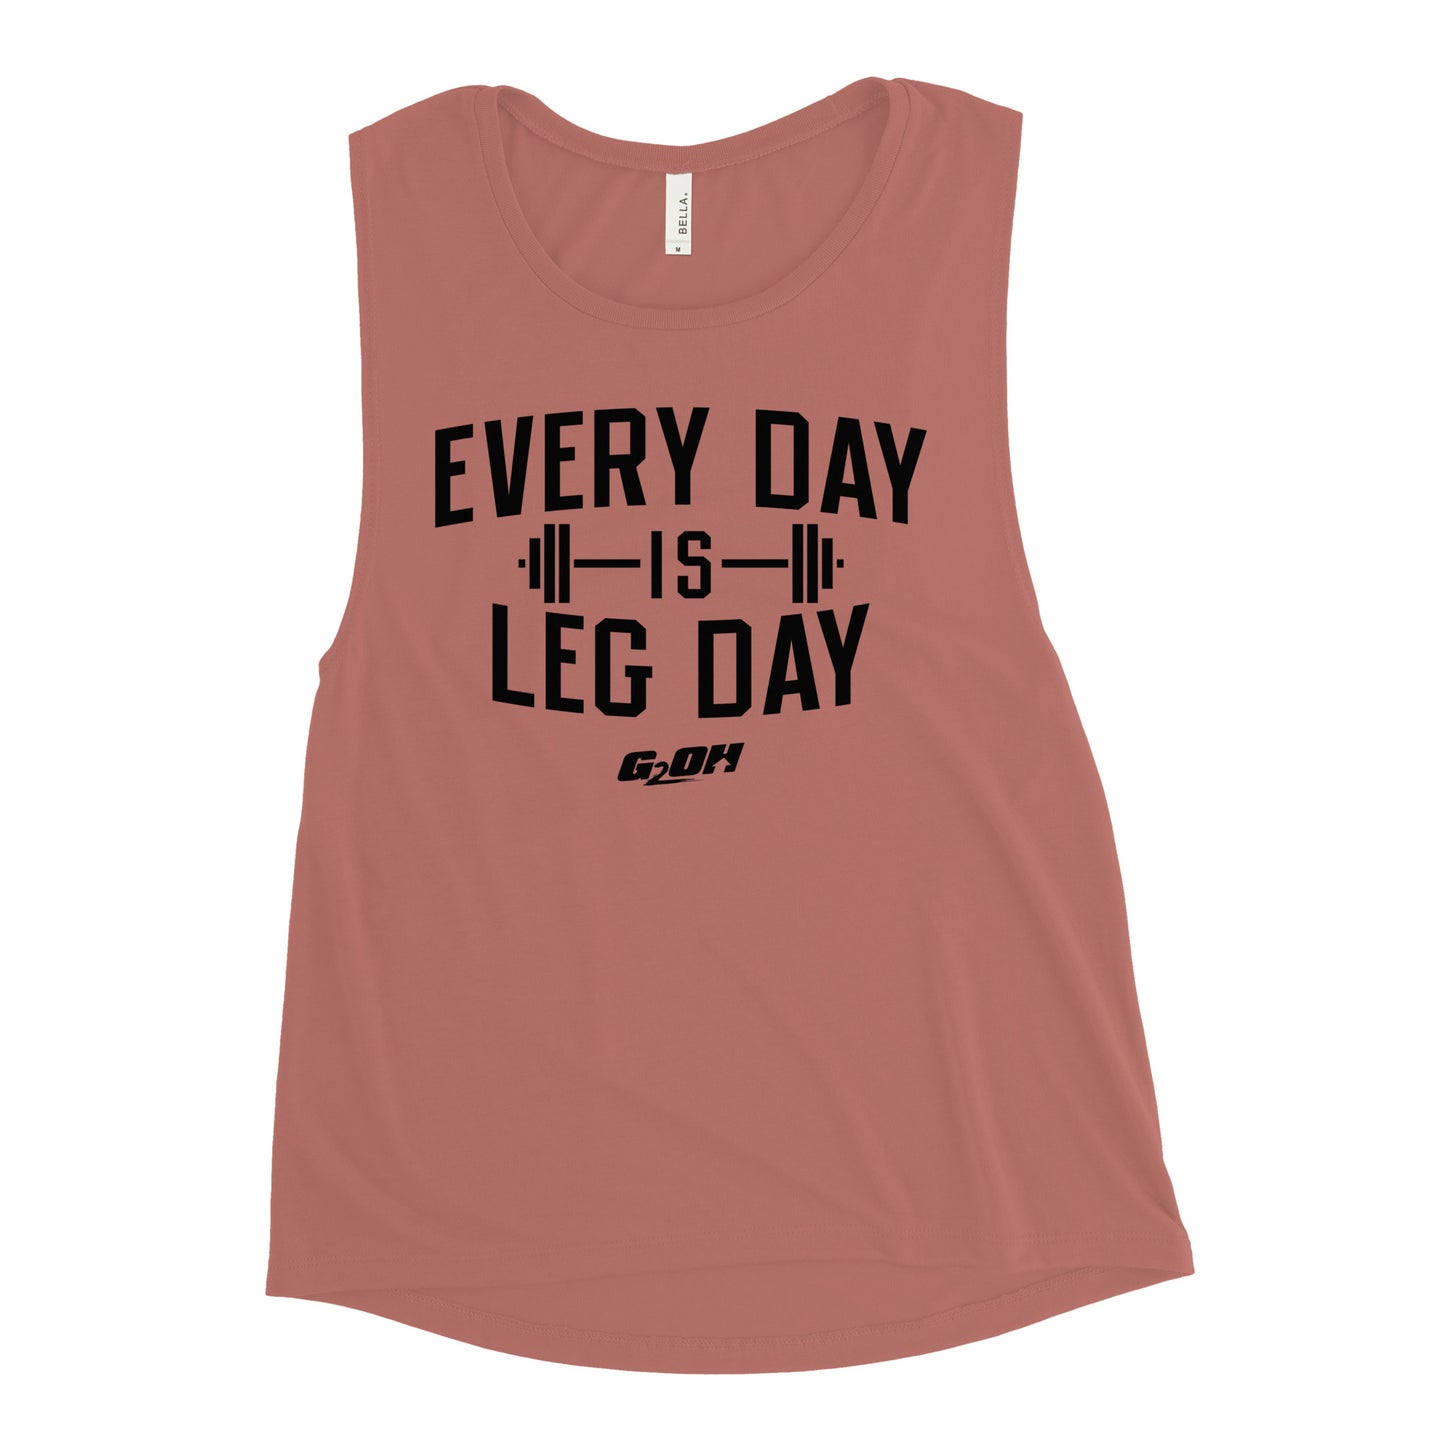 Every Day Is Leg Day Women's Muscle Tank